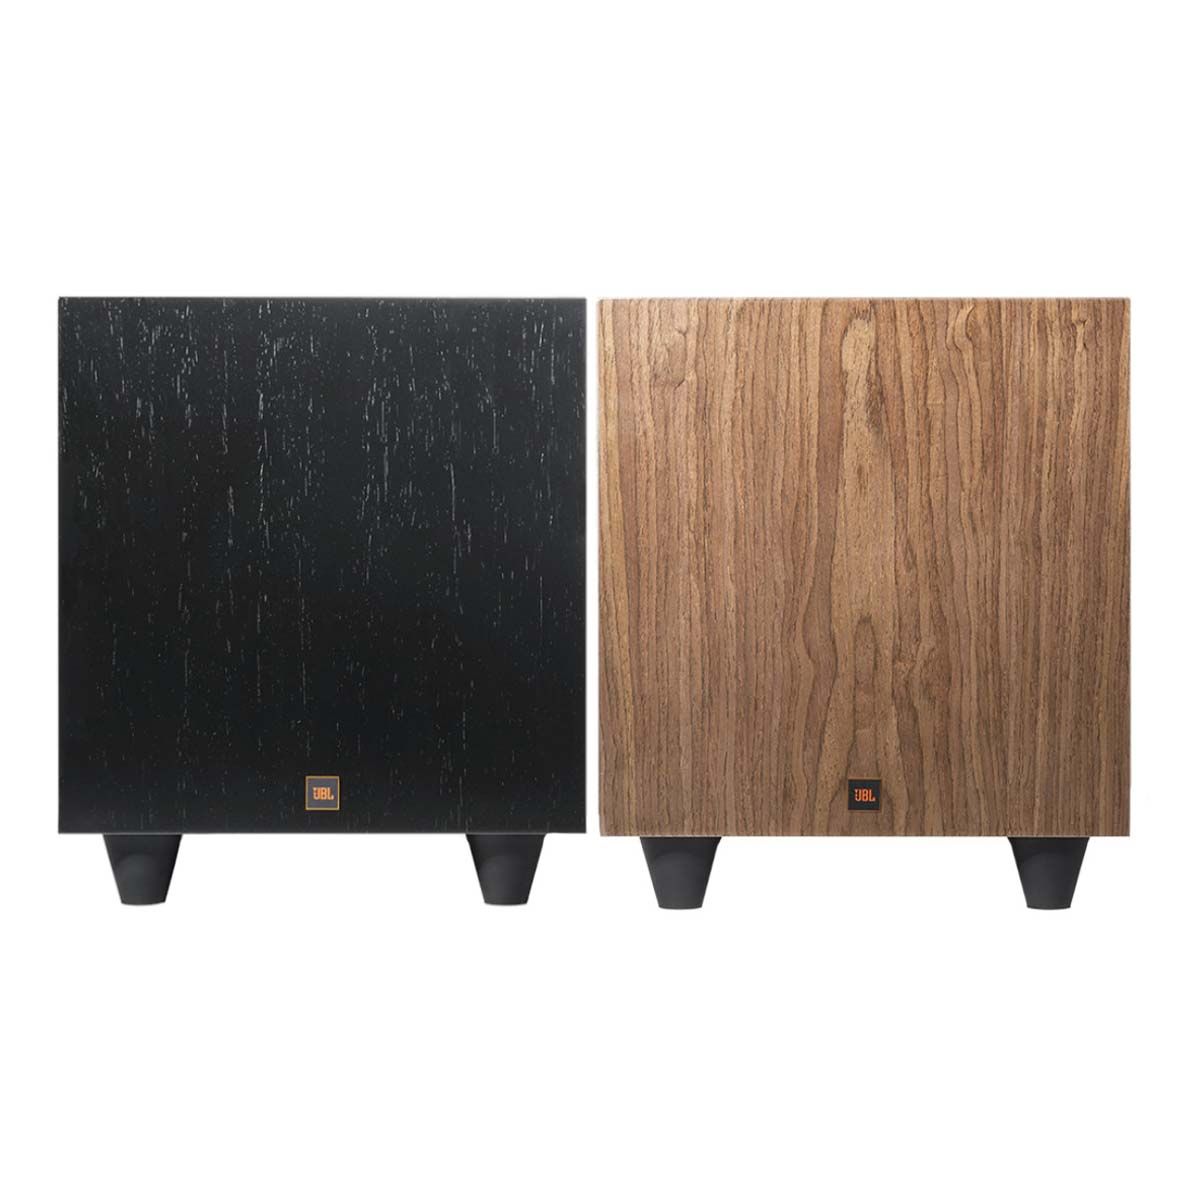 JBL L10cs Classic Series Subwoofer - both colorways side-by-side 